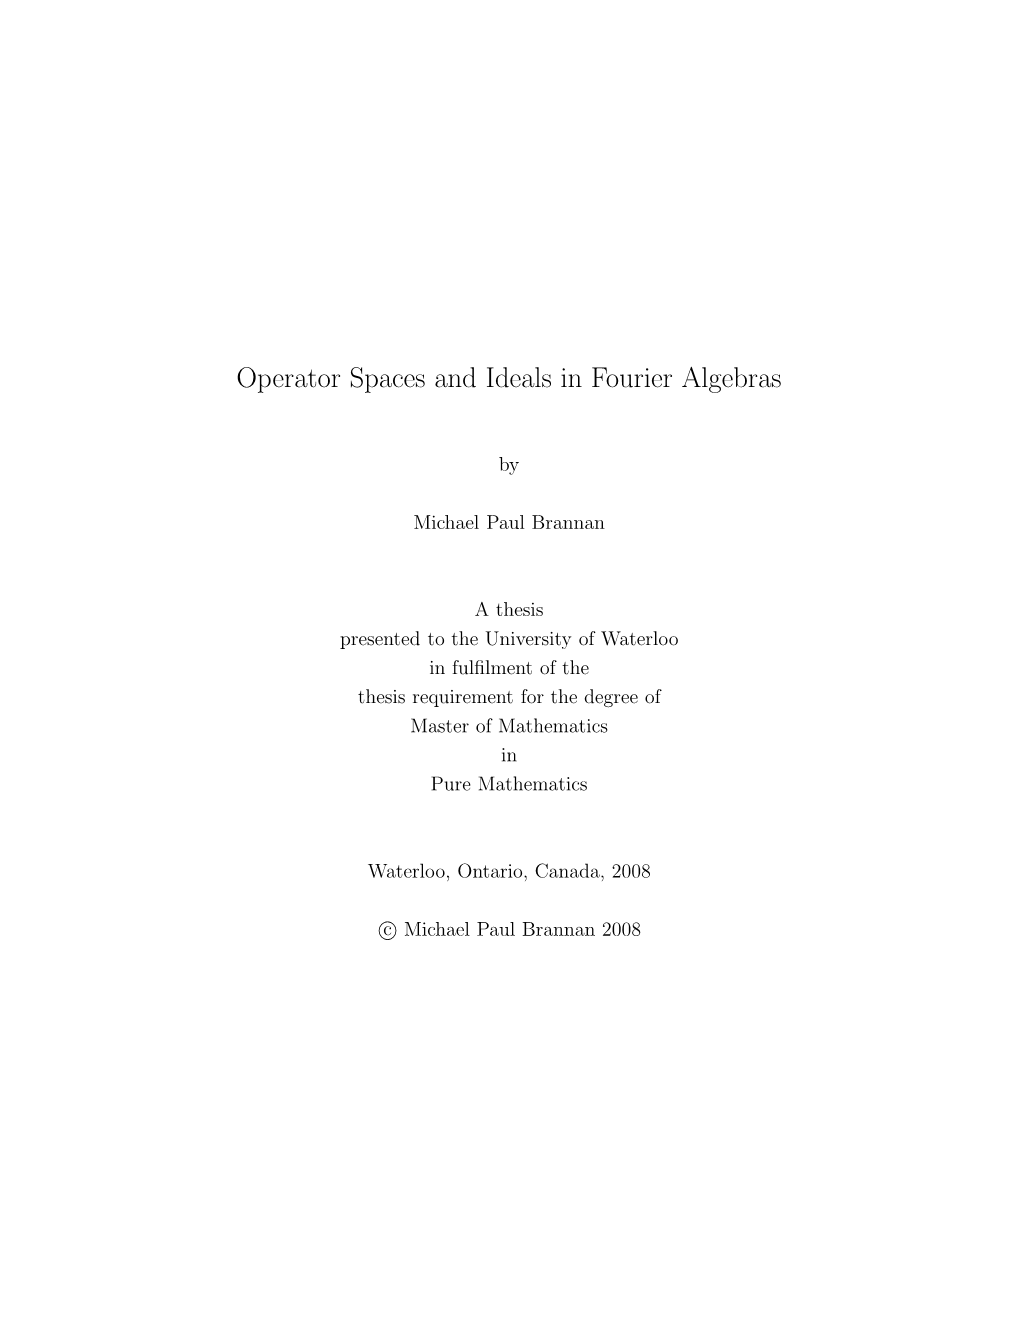 Operator Spaces and Ideals in Fourier Algebras